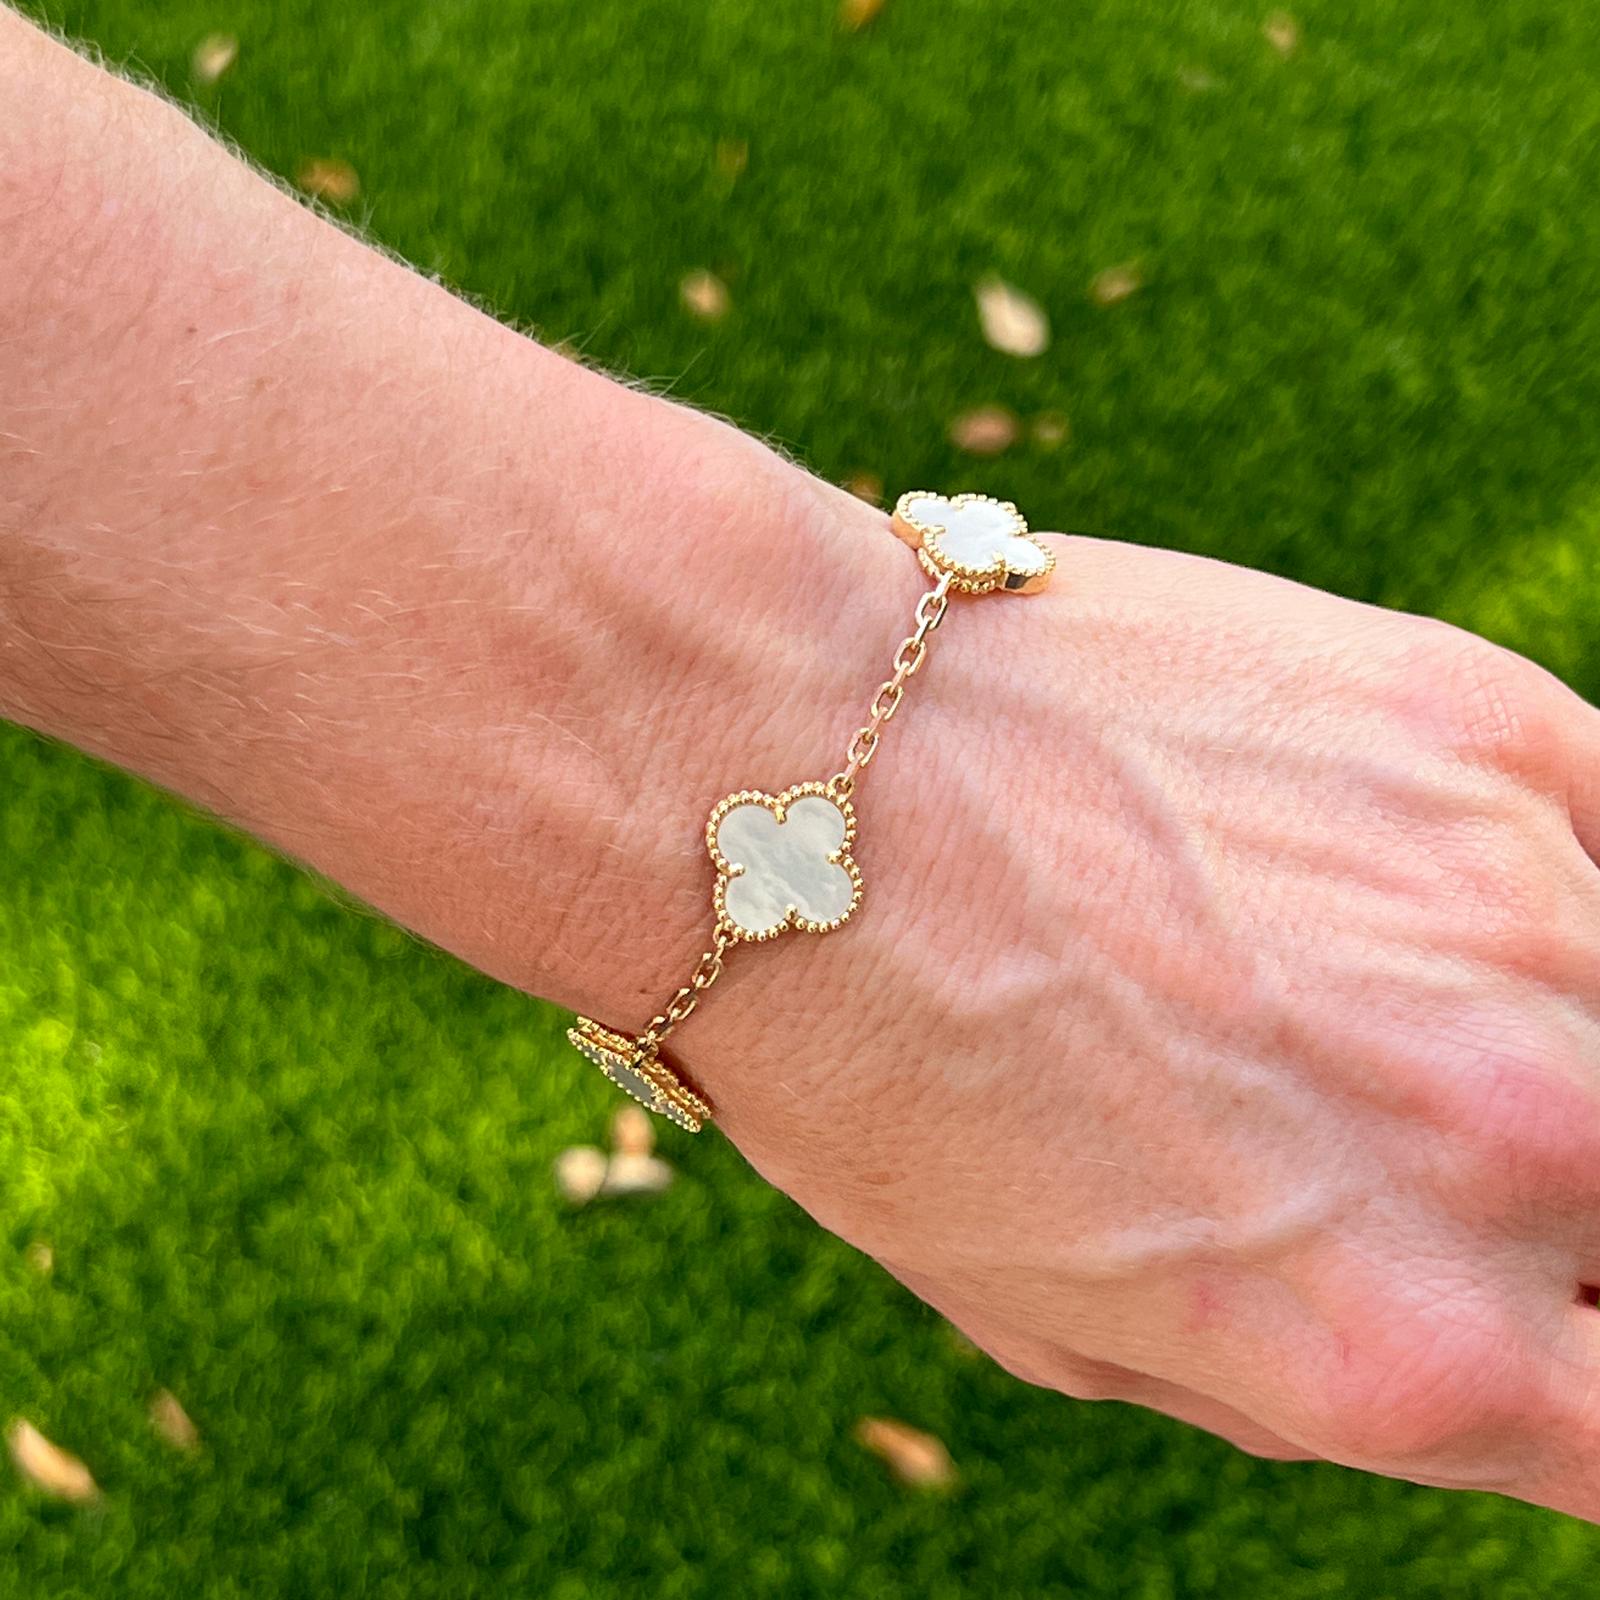 Authentic Van Cleef & Arpels Vintage Alhambra Mother of Pearl bracelet fashioned in 18 karat yellow gold. The 5 motif bracelet was originally purchased in 2019. The bracelet measures 7.5 inches in length and is signed, numbered, and hallmarked.